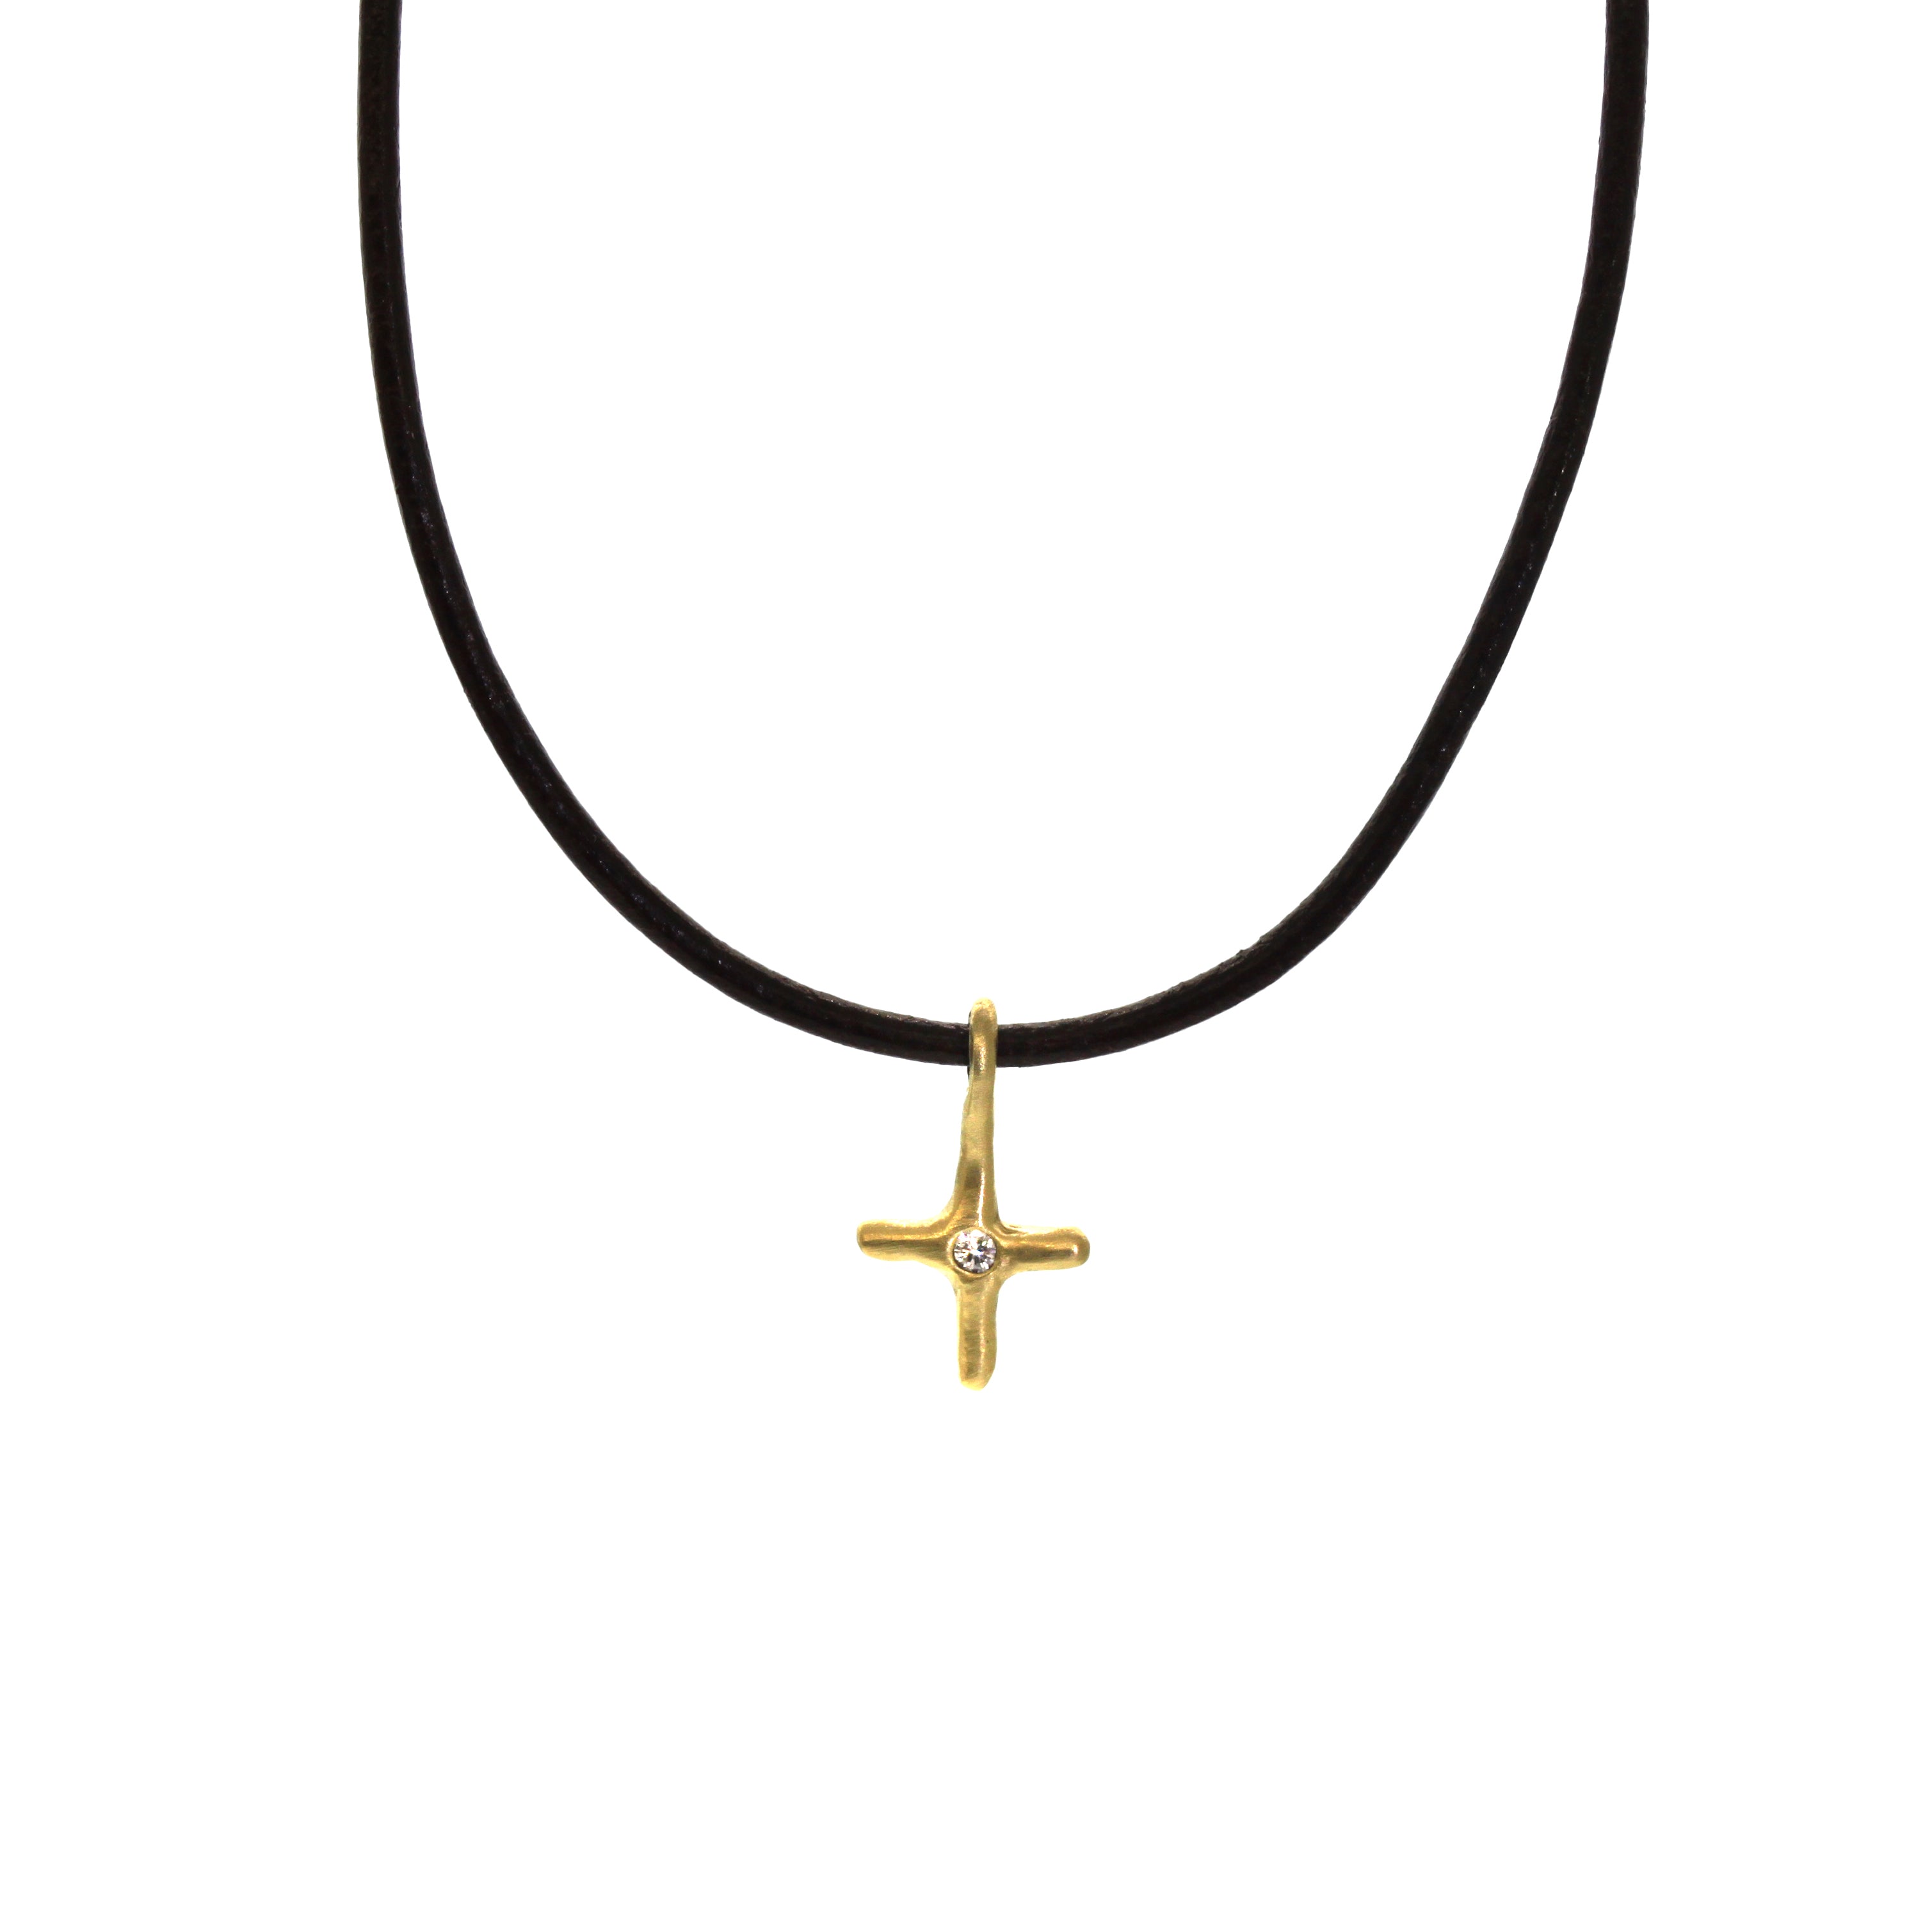 A simple everyday accessory or the perfect layering necklace, this Gold & Diamond Cross Necklace is a must-have. It features a small, organic yellow gold cross with a diamond inlaid in the center and dangling from brown leather. Each piece is handcrafted and made to order at Rebecca Lankford Designs in Houston, Texas.